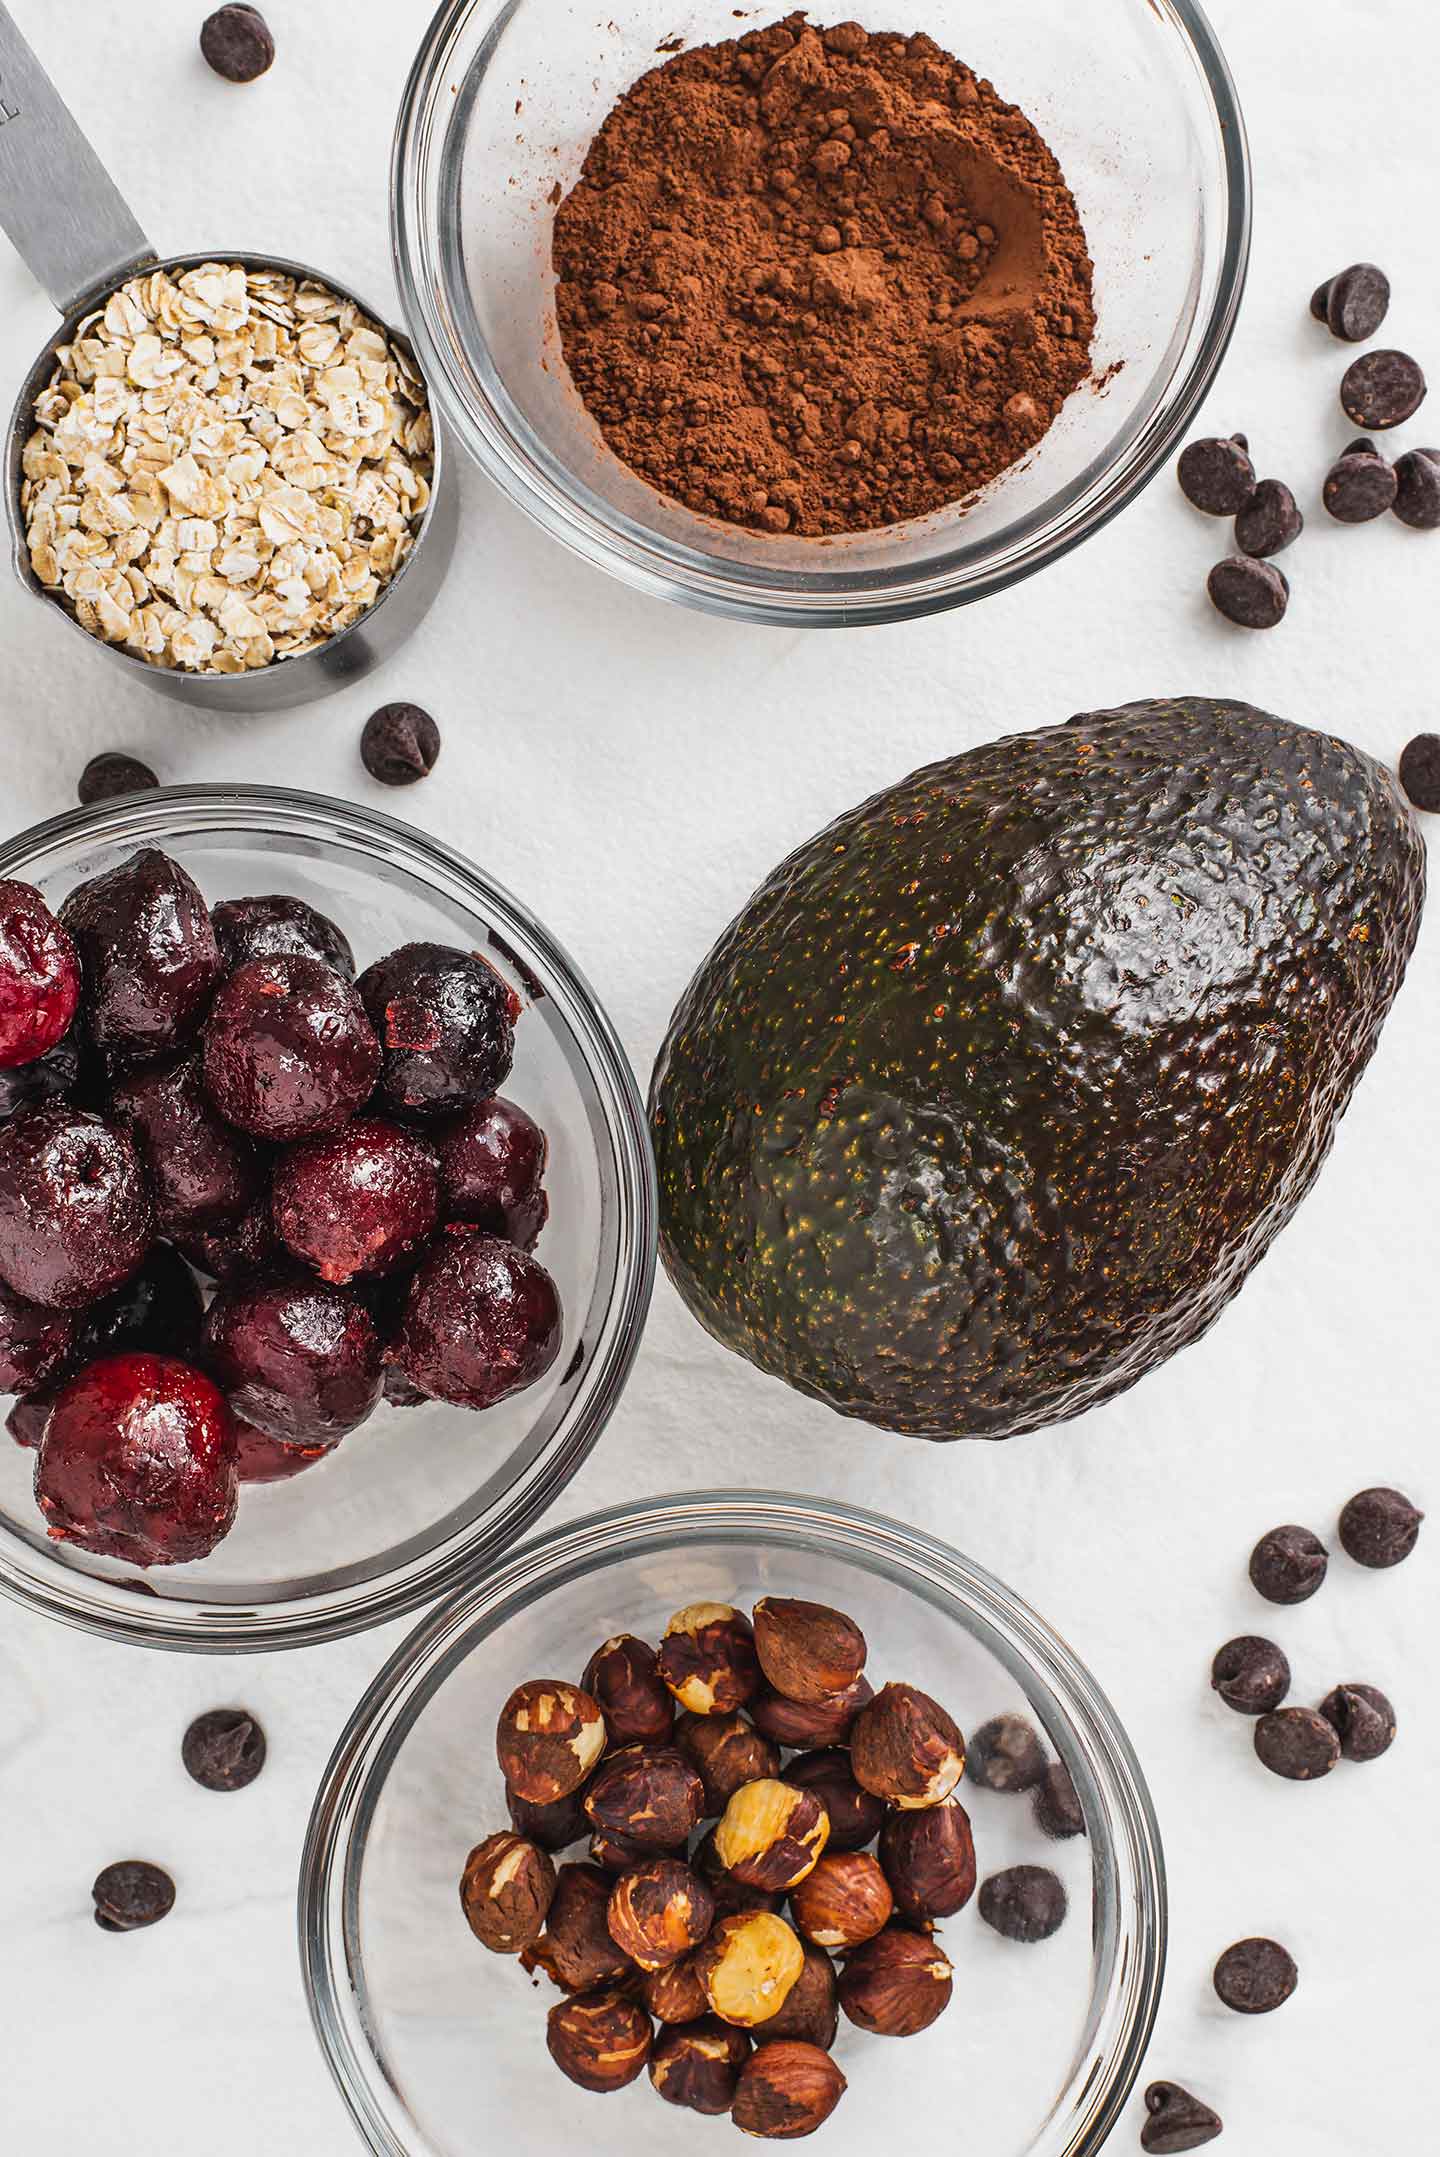 Top down view of an avocado, a dish of frozen cherries, a measuring cup of oats, and small dishes of cocoa powder and hazelnuts. Chocolate chips speckle the tray the ingredients sit upon.